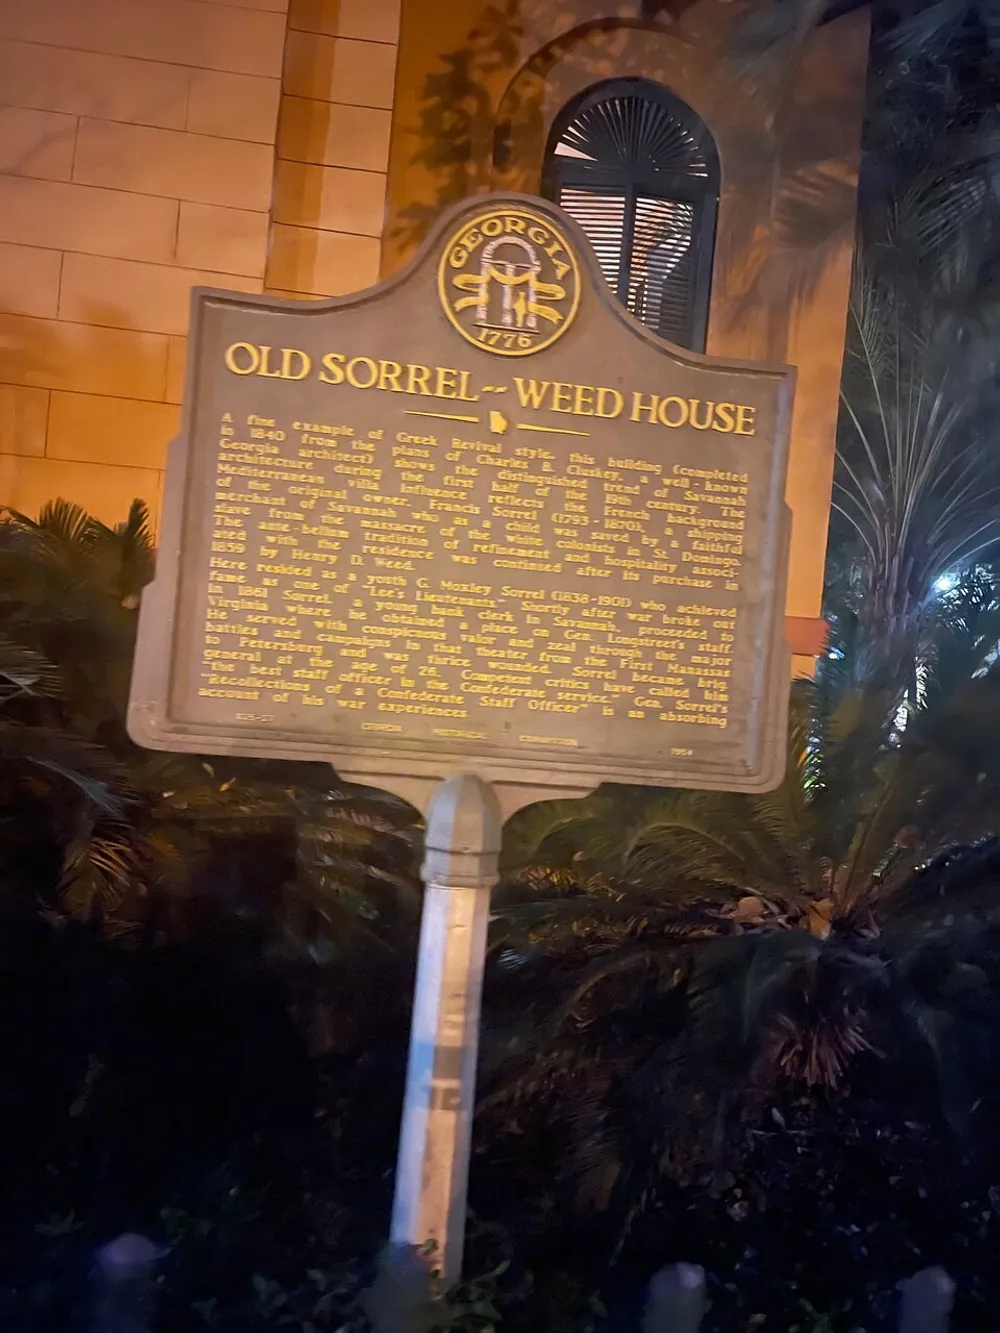 The image shows a historical marker for the Old Sorrel-Weed House a Greek Revival-style building located in Savannah Georgia illuminated by a warm light at night and surrounded by foliage